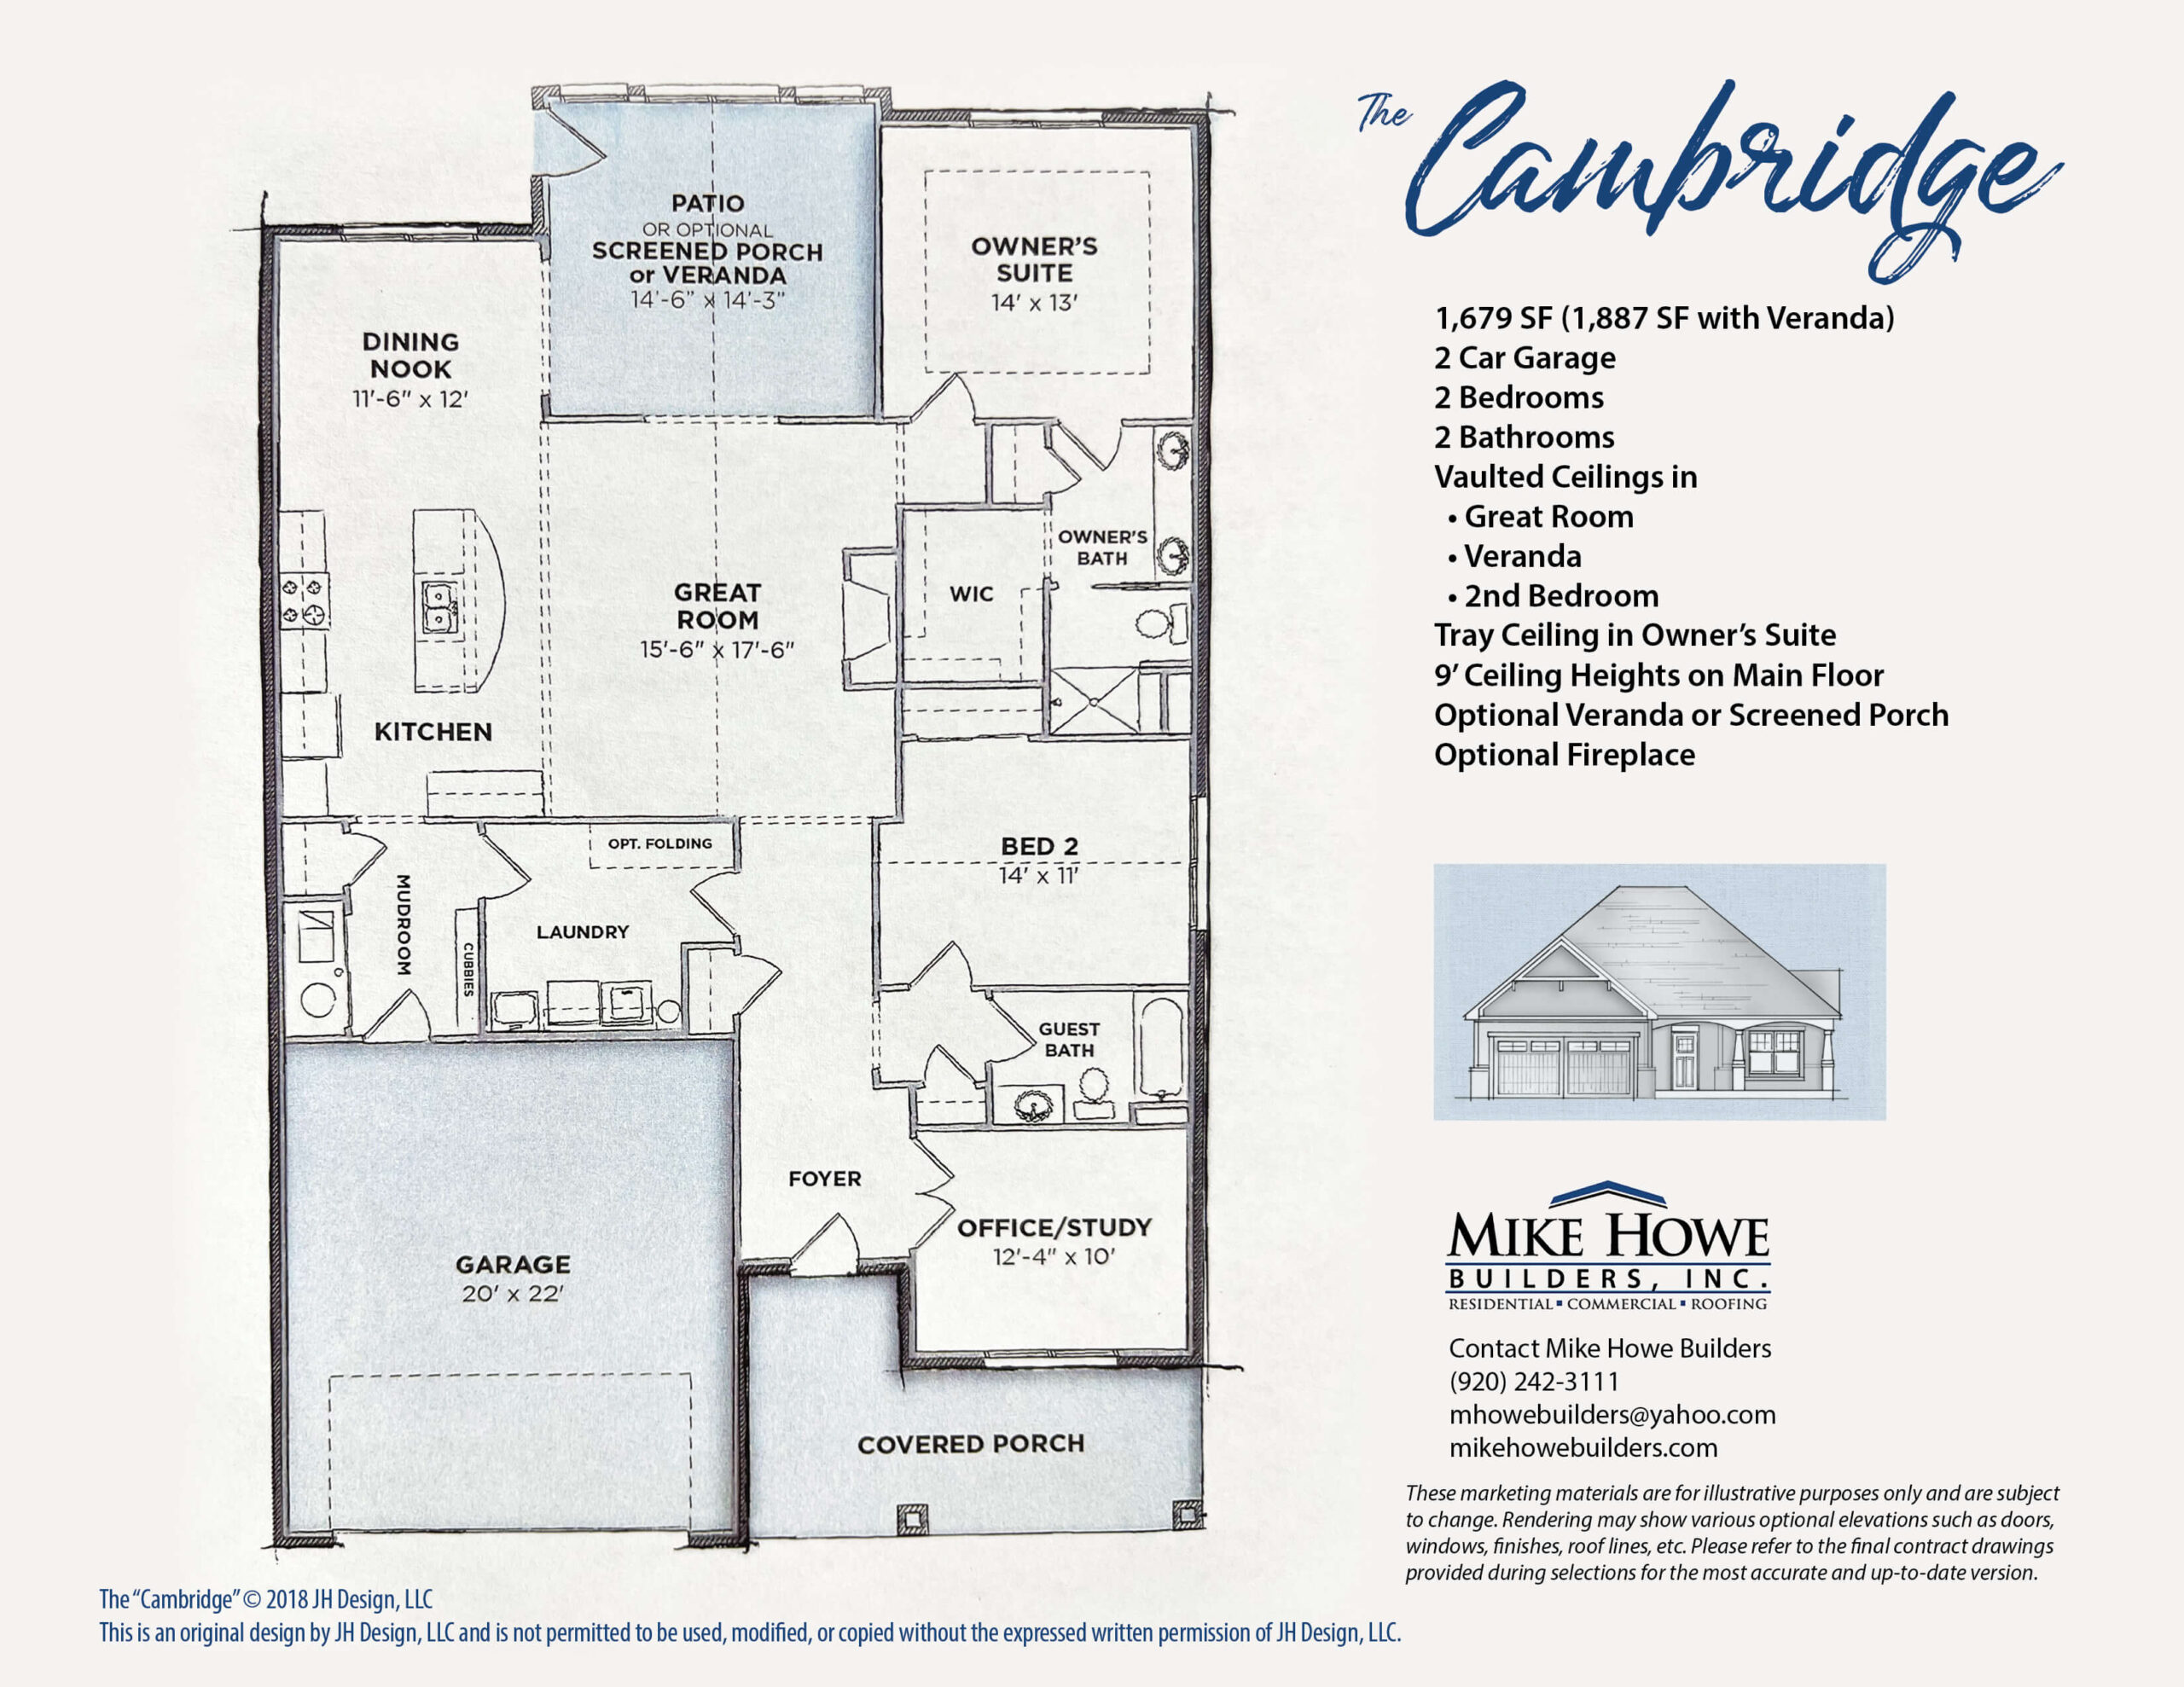 The Cambridge Floor Plan and Detail